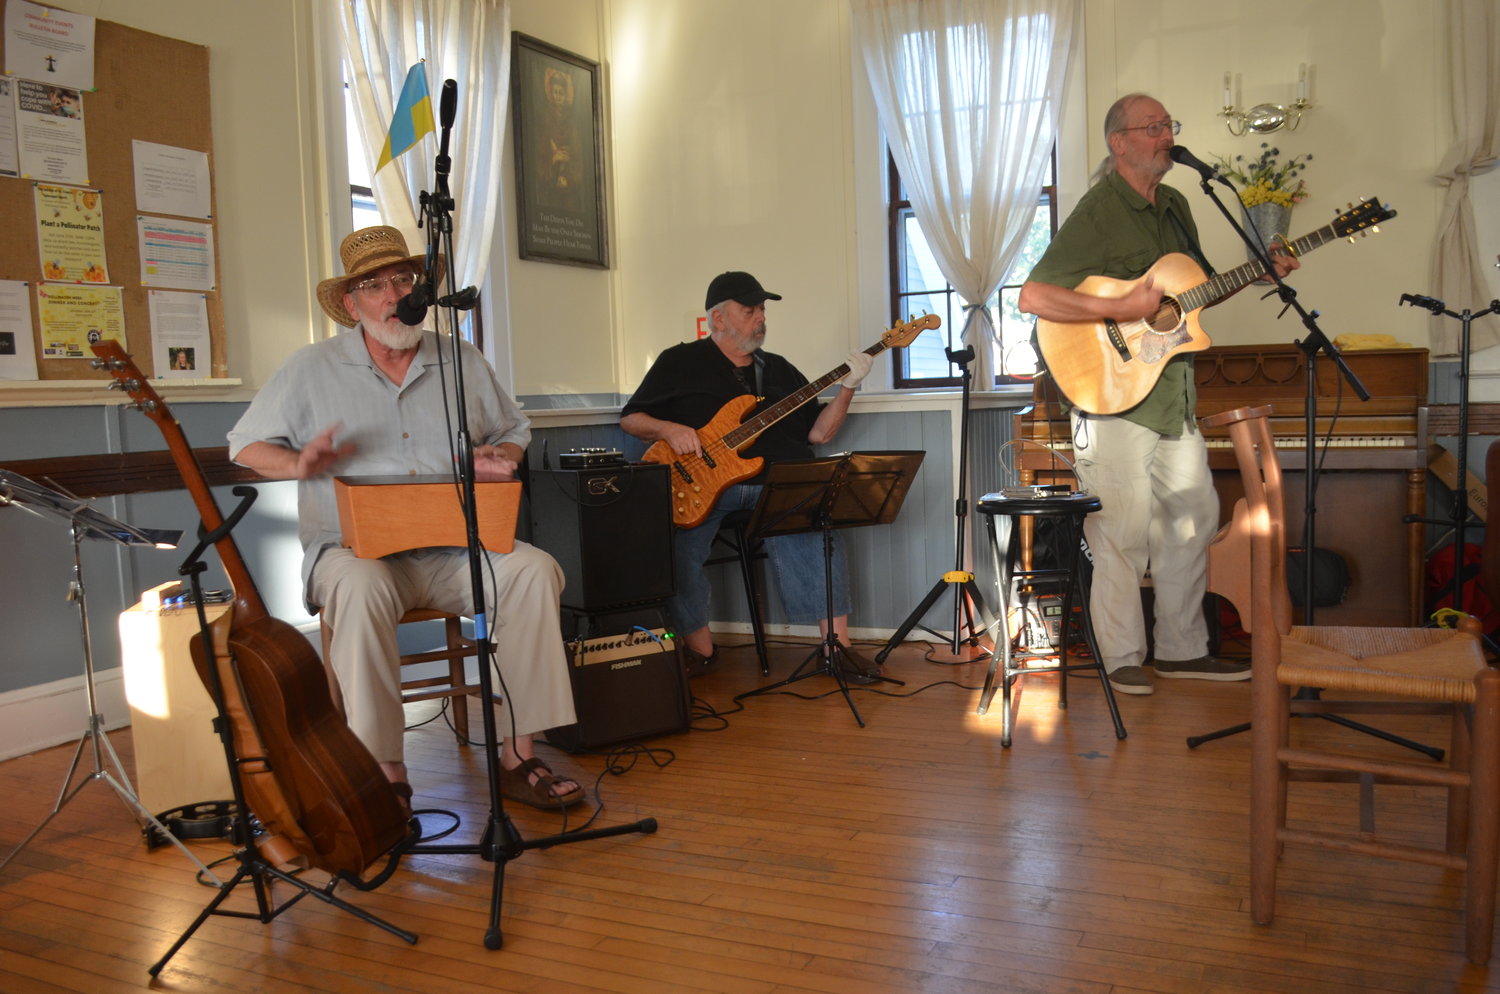 Pollinator Week’s festivities concluded with a performance by the South Country String Band.